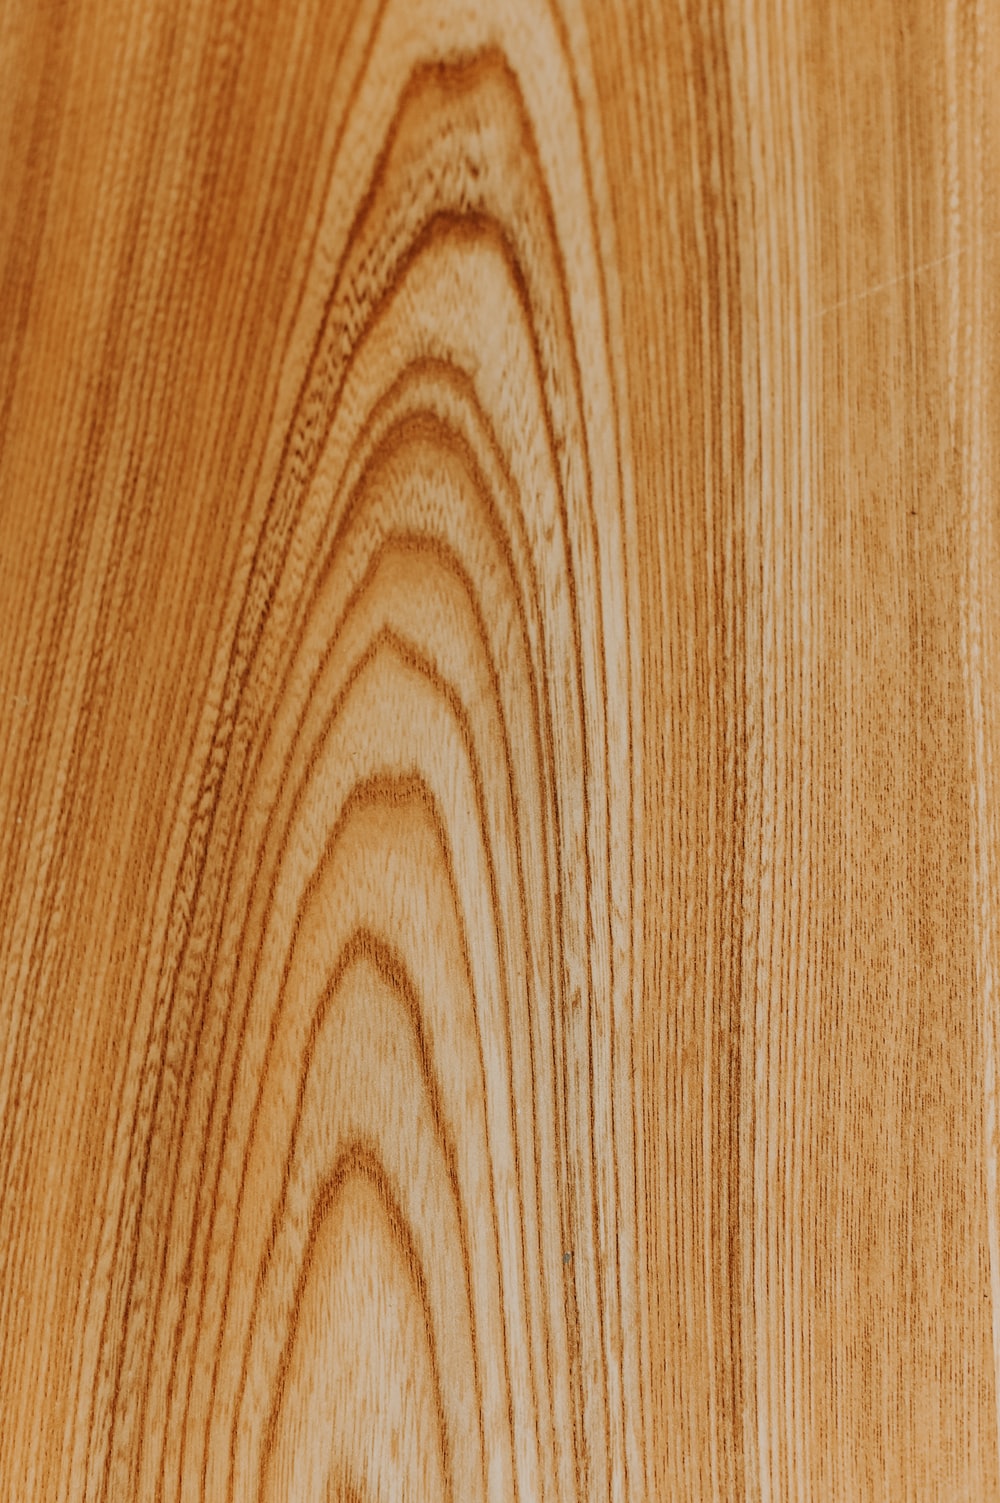 Plywood Picture. Download Free Image